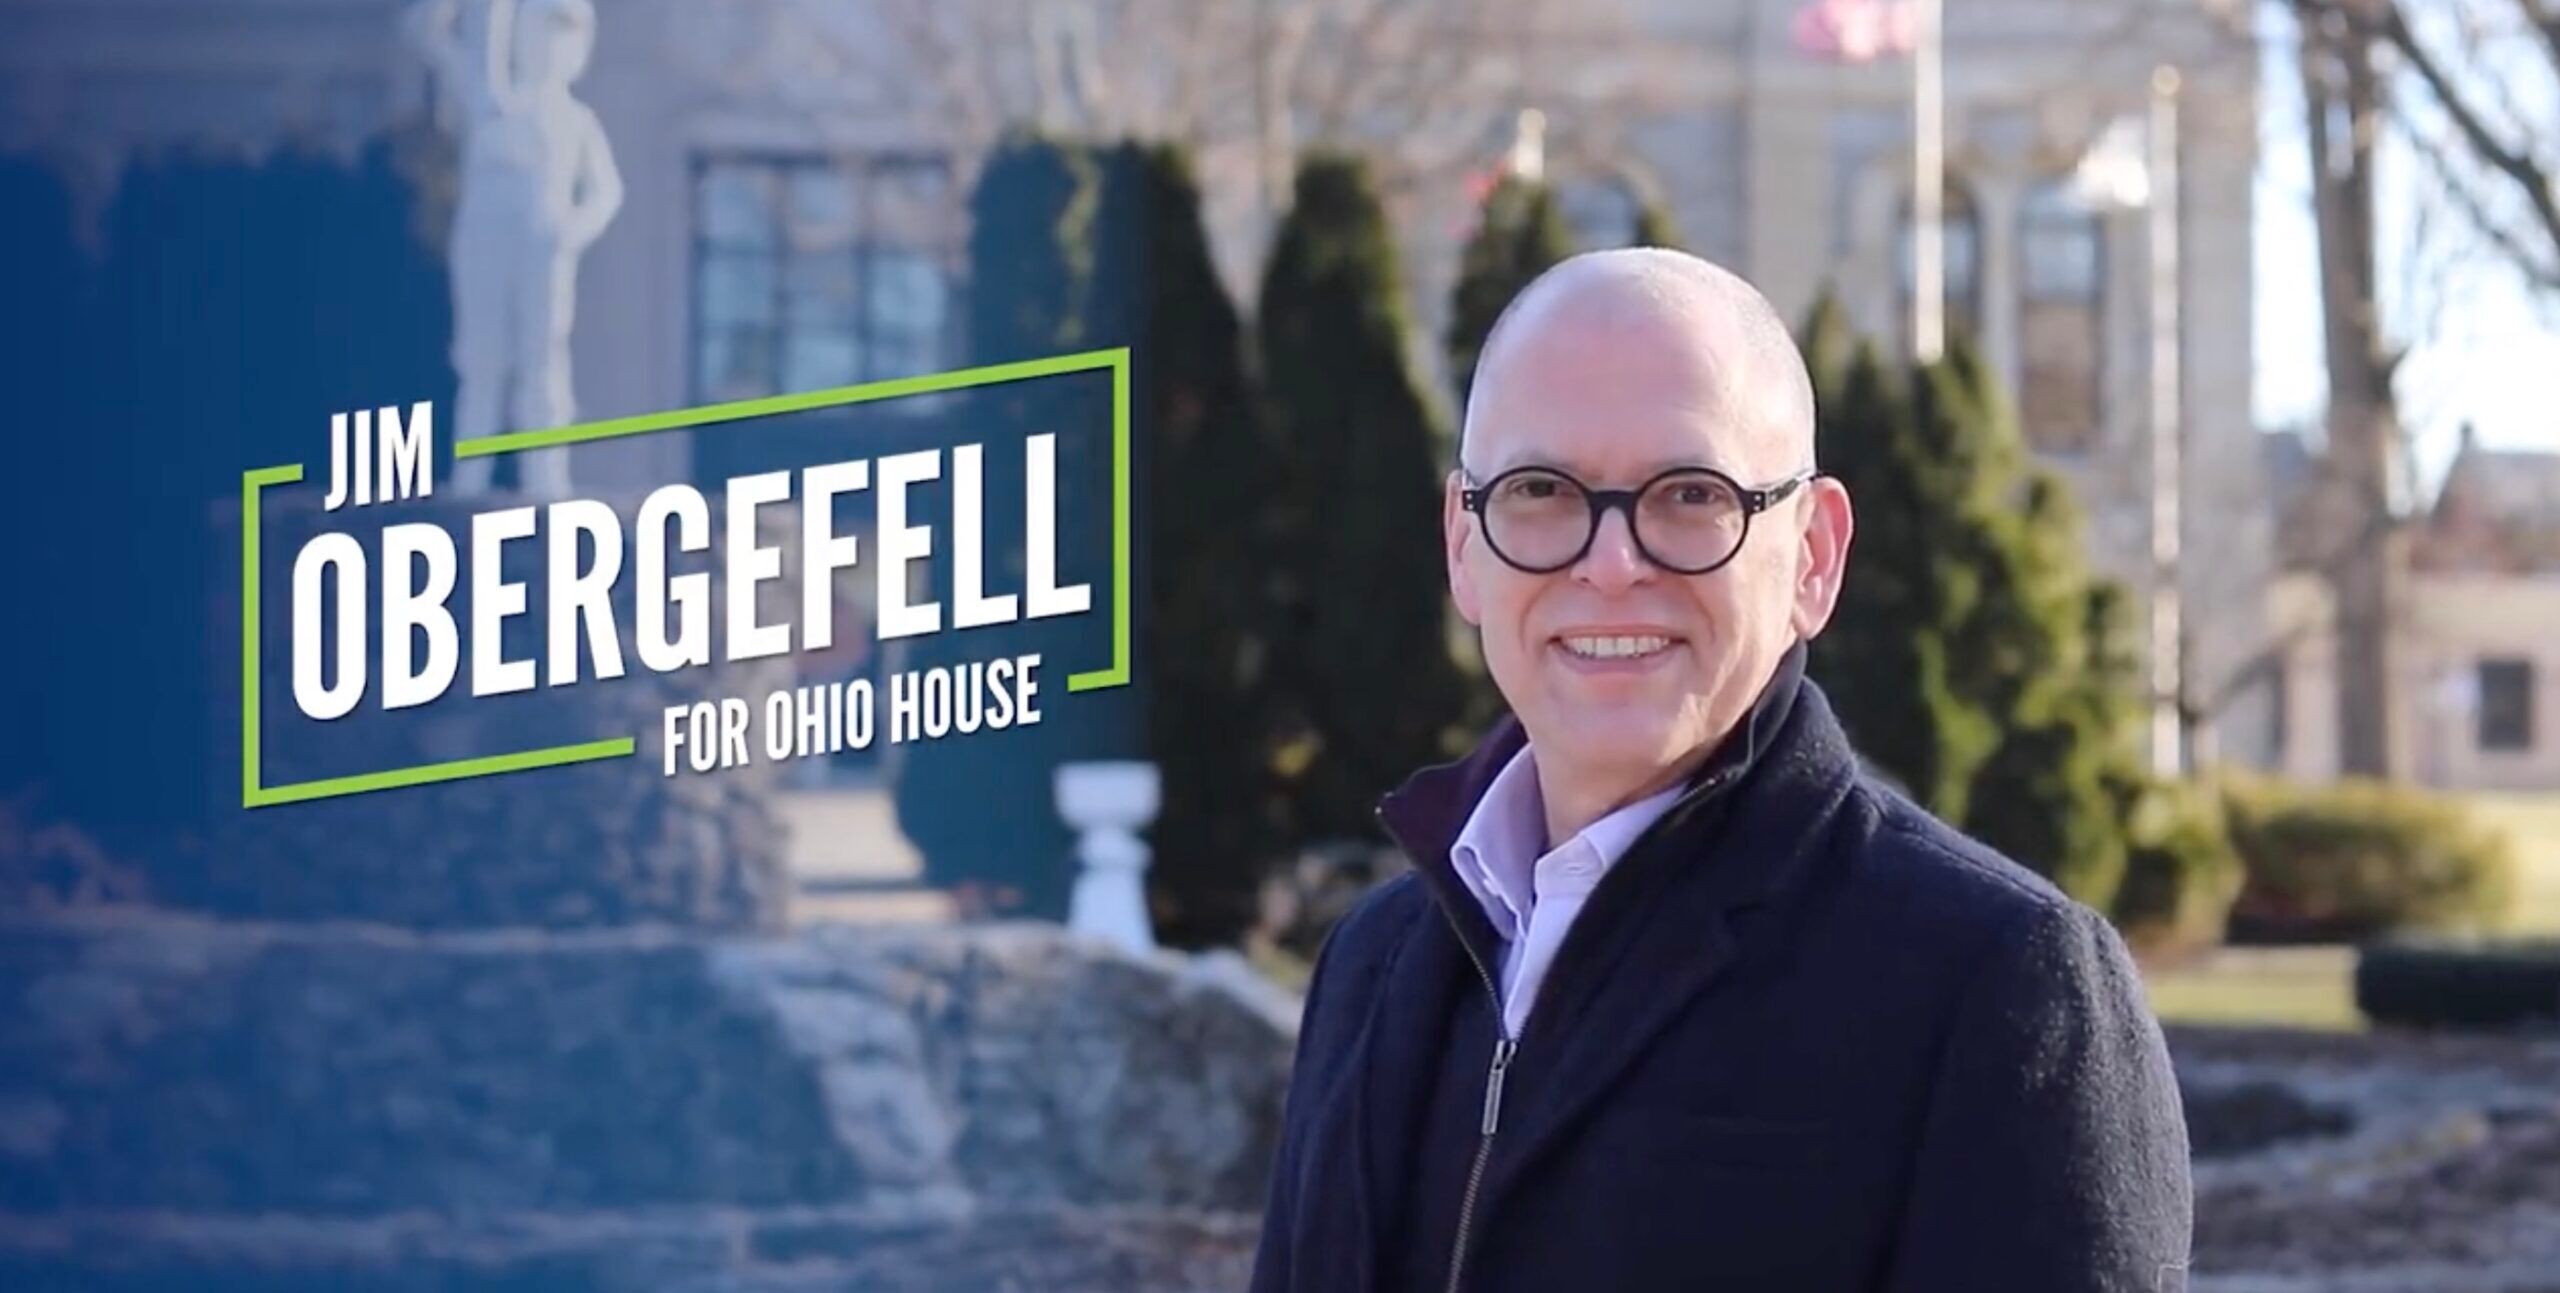 Jim Obergefell running for Ohio House